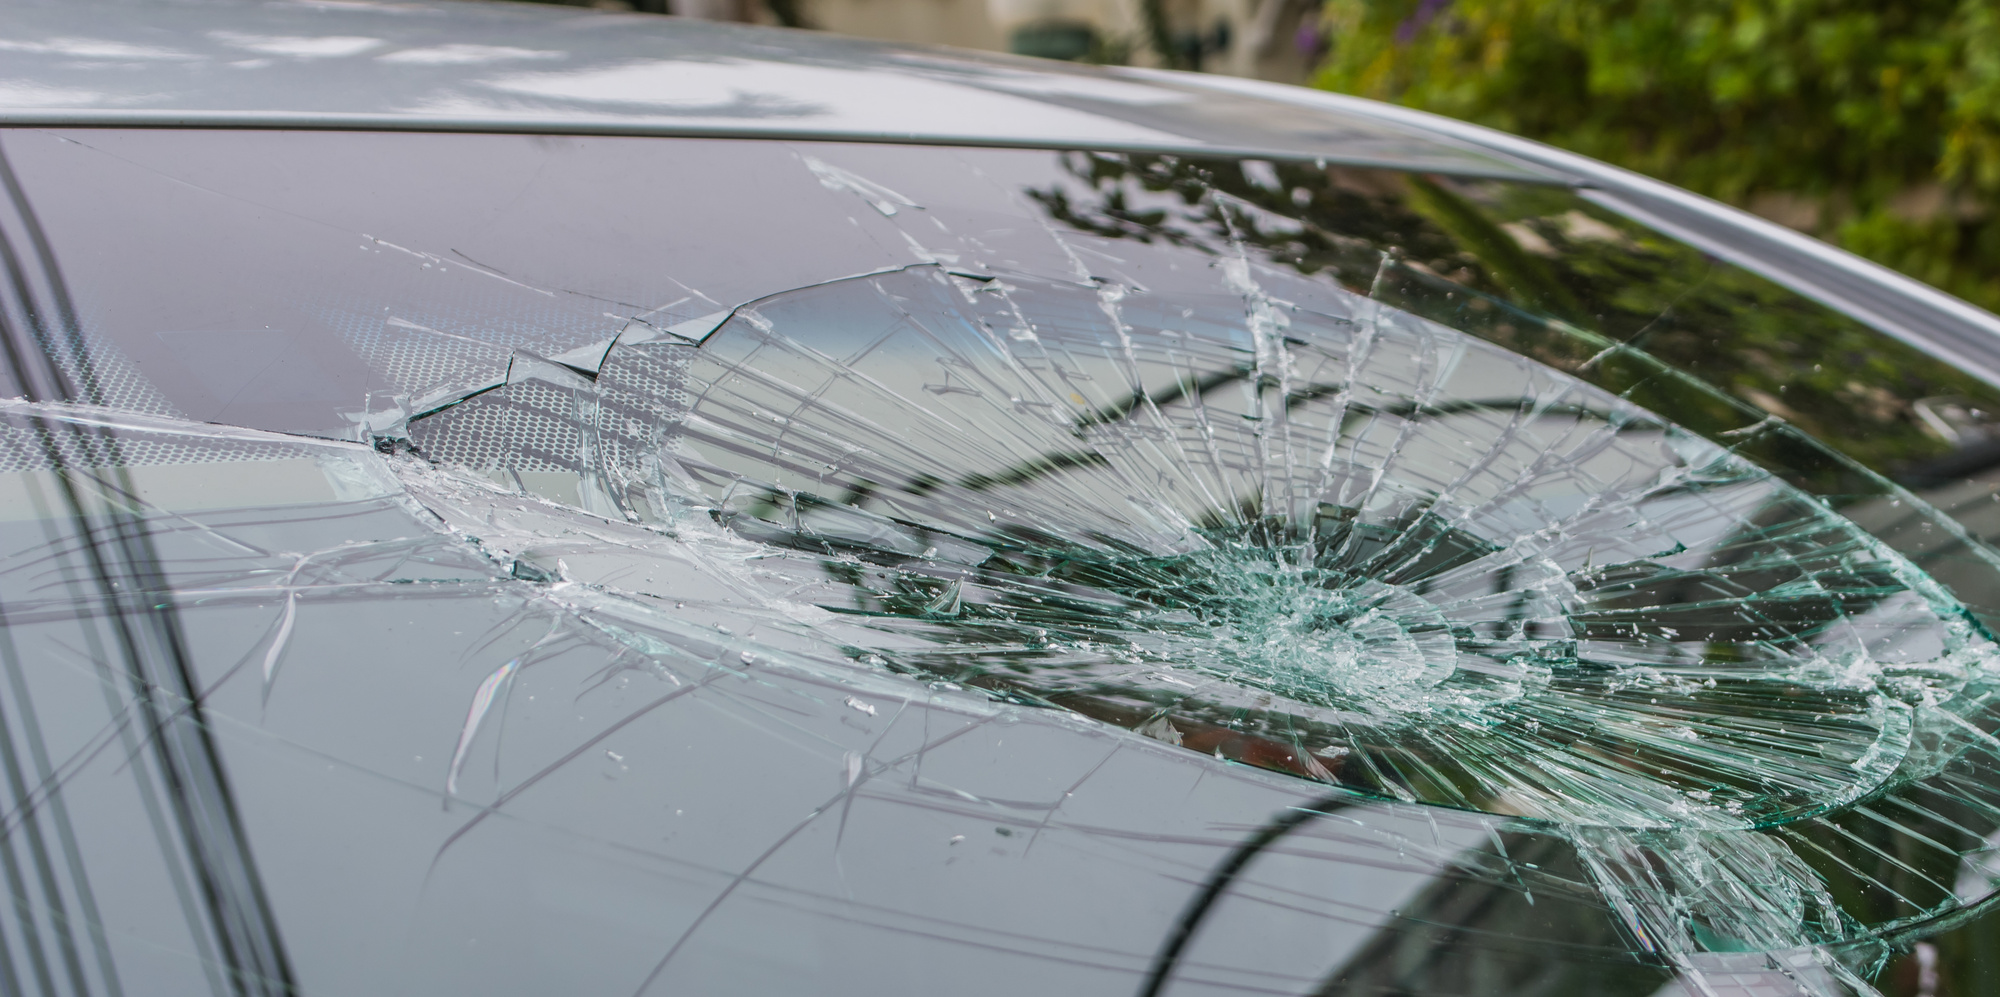 Windshield Repair Services